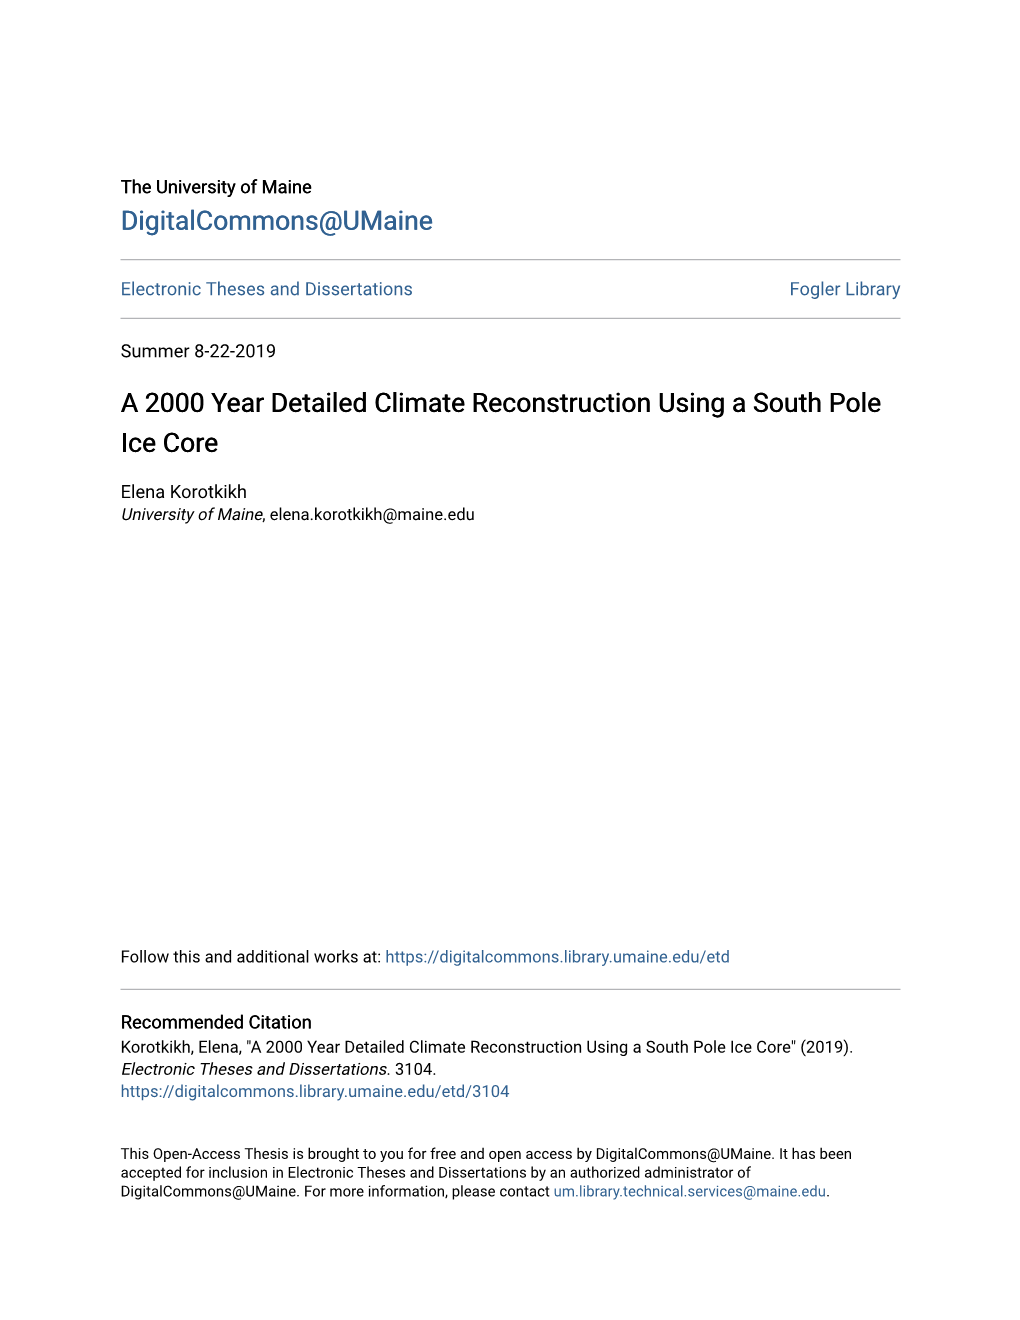 A 2000 Year Detailed Climate Reconstruction Using a South Pole Ice Core